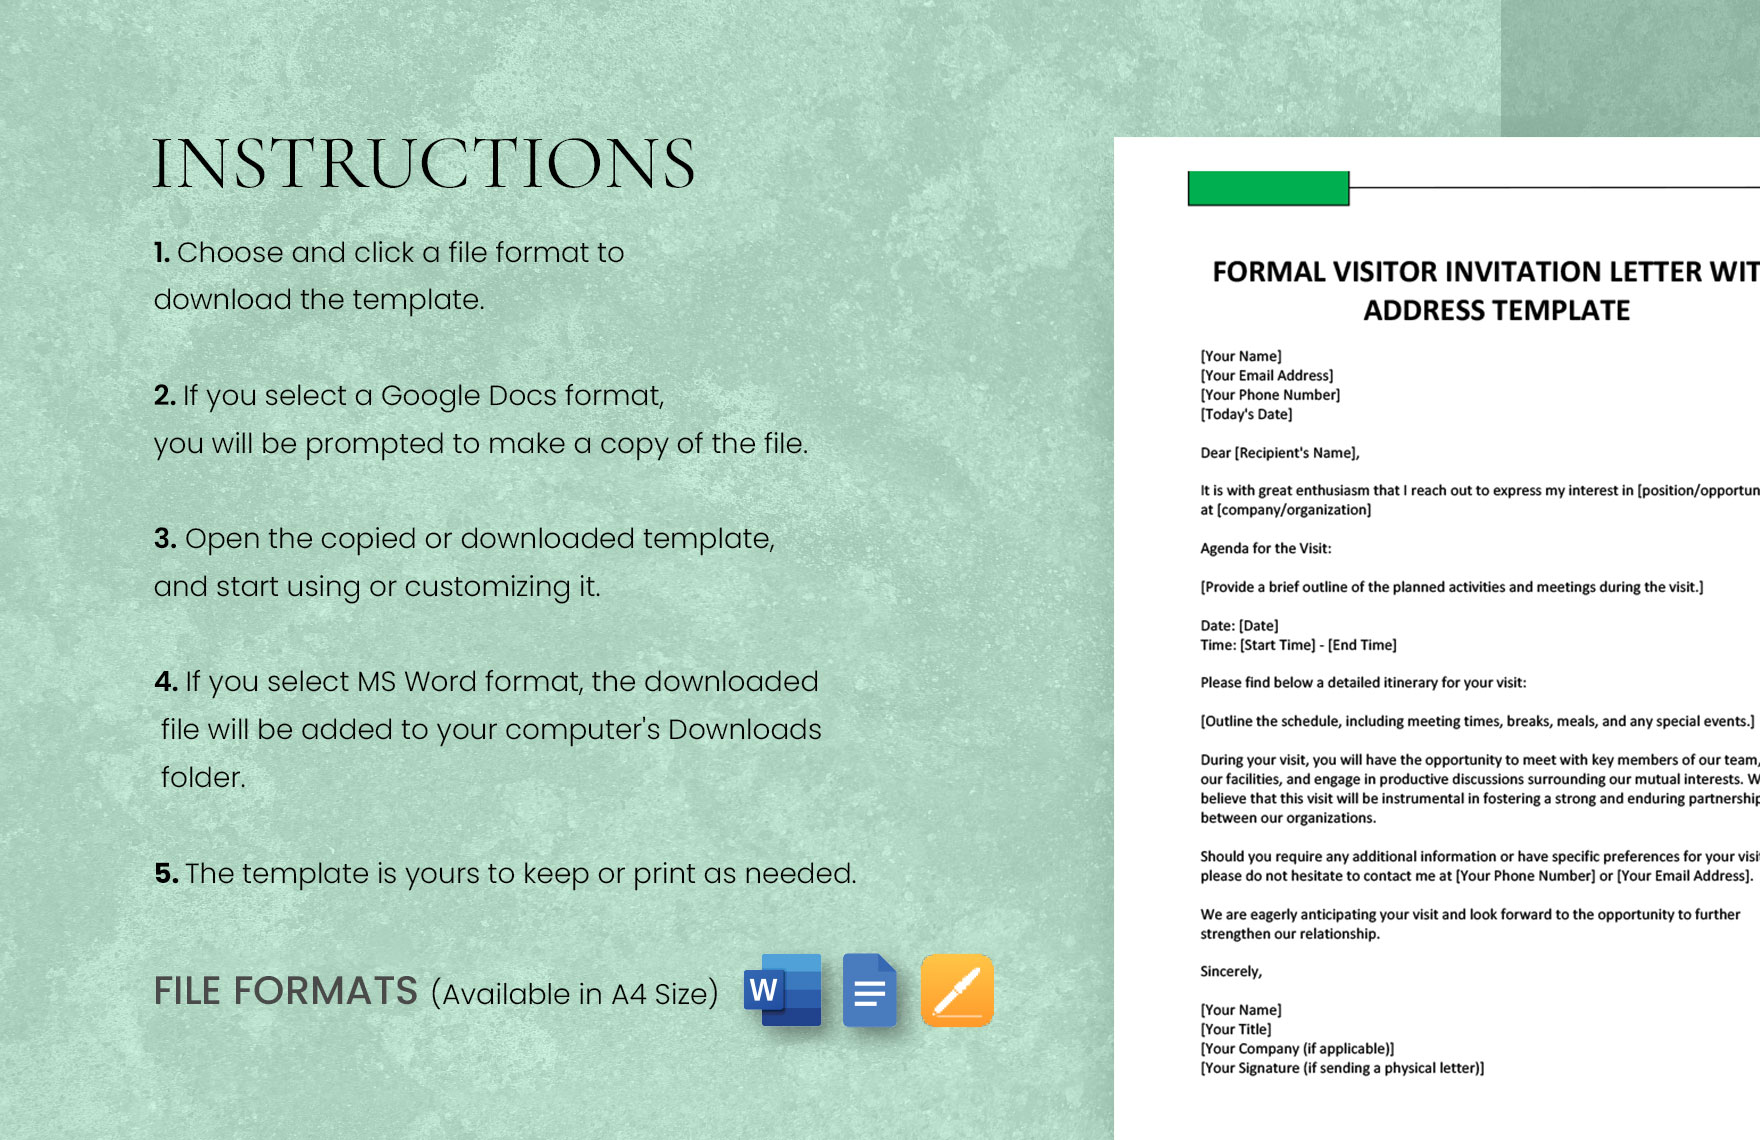 Formal Visitor Invitation Letter with Address Template